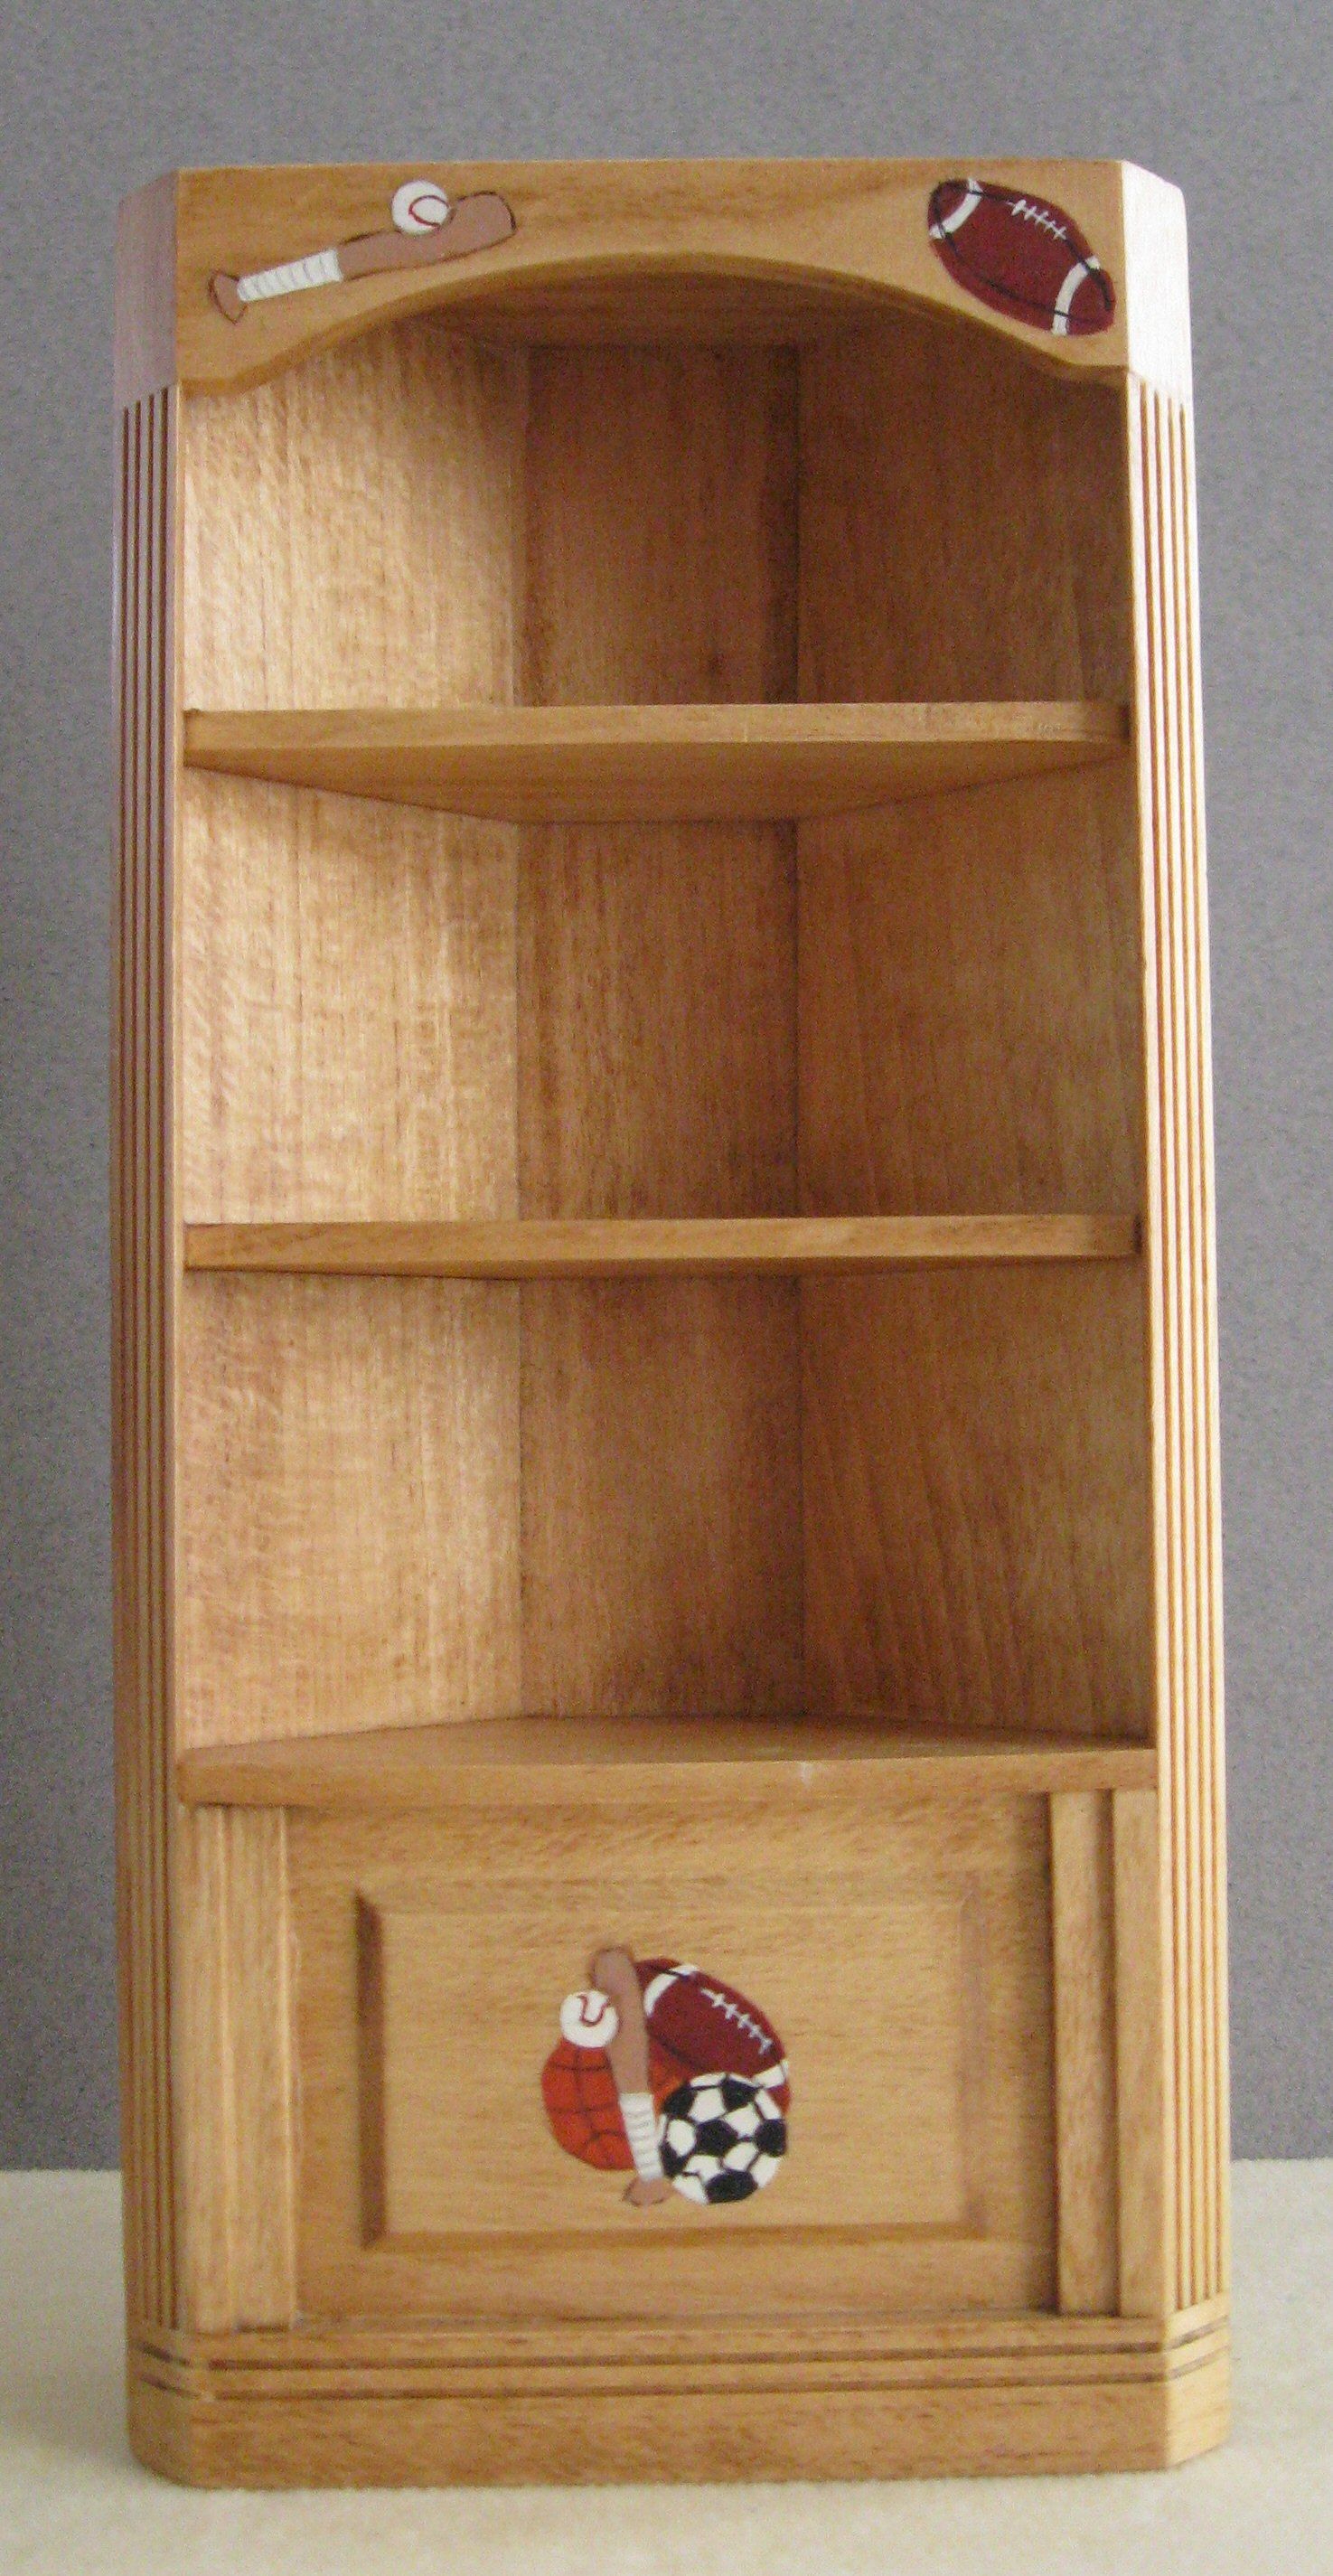 Bookcasecorner Handpainted On Oak 2600 Acd Miniatures Within Painted Oak Bookcase (View 14 of 15)